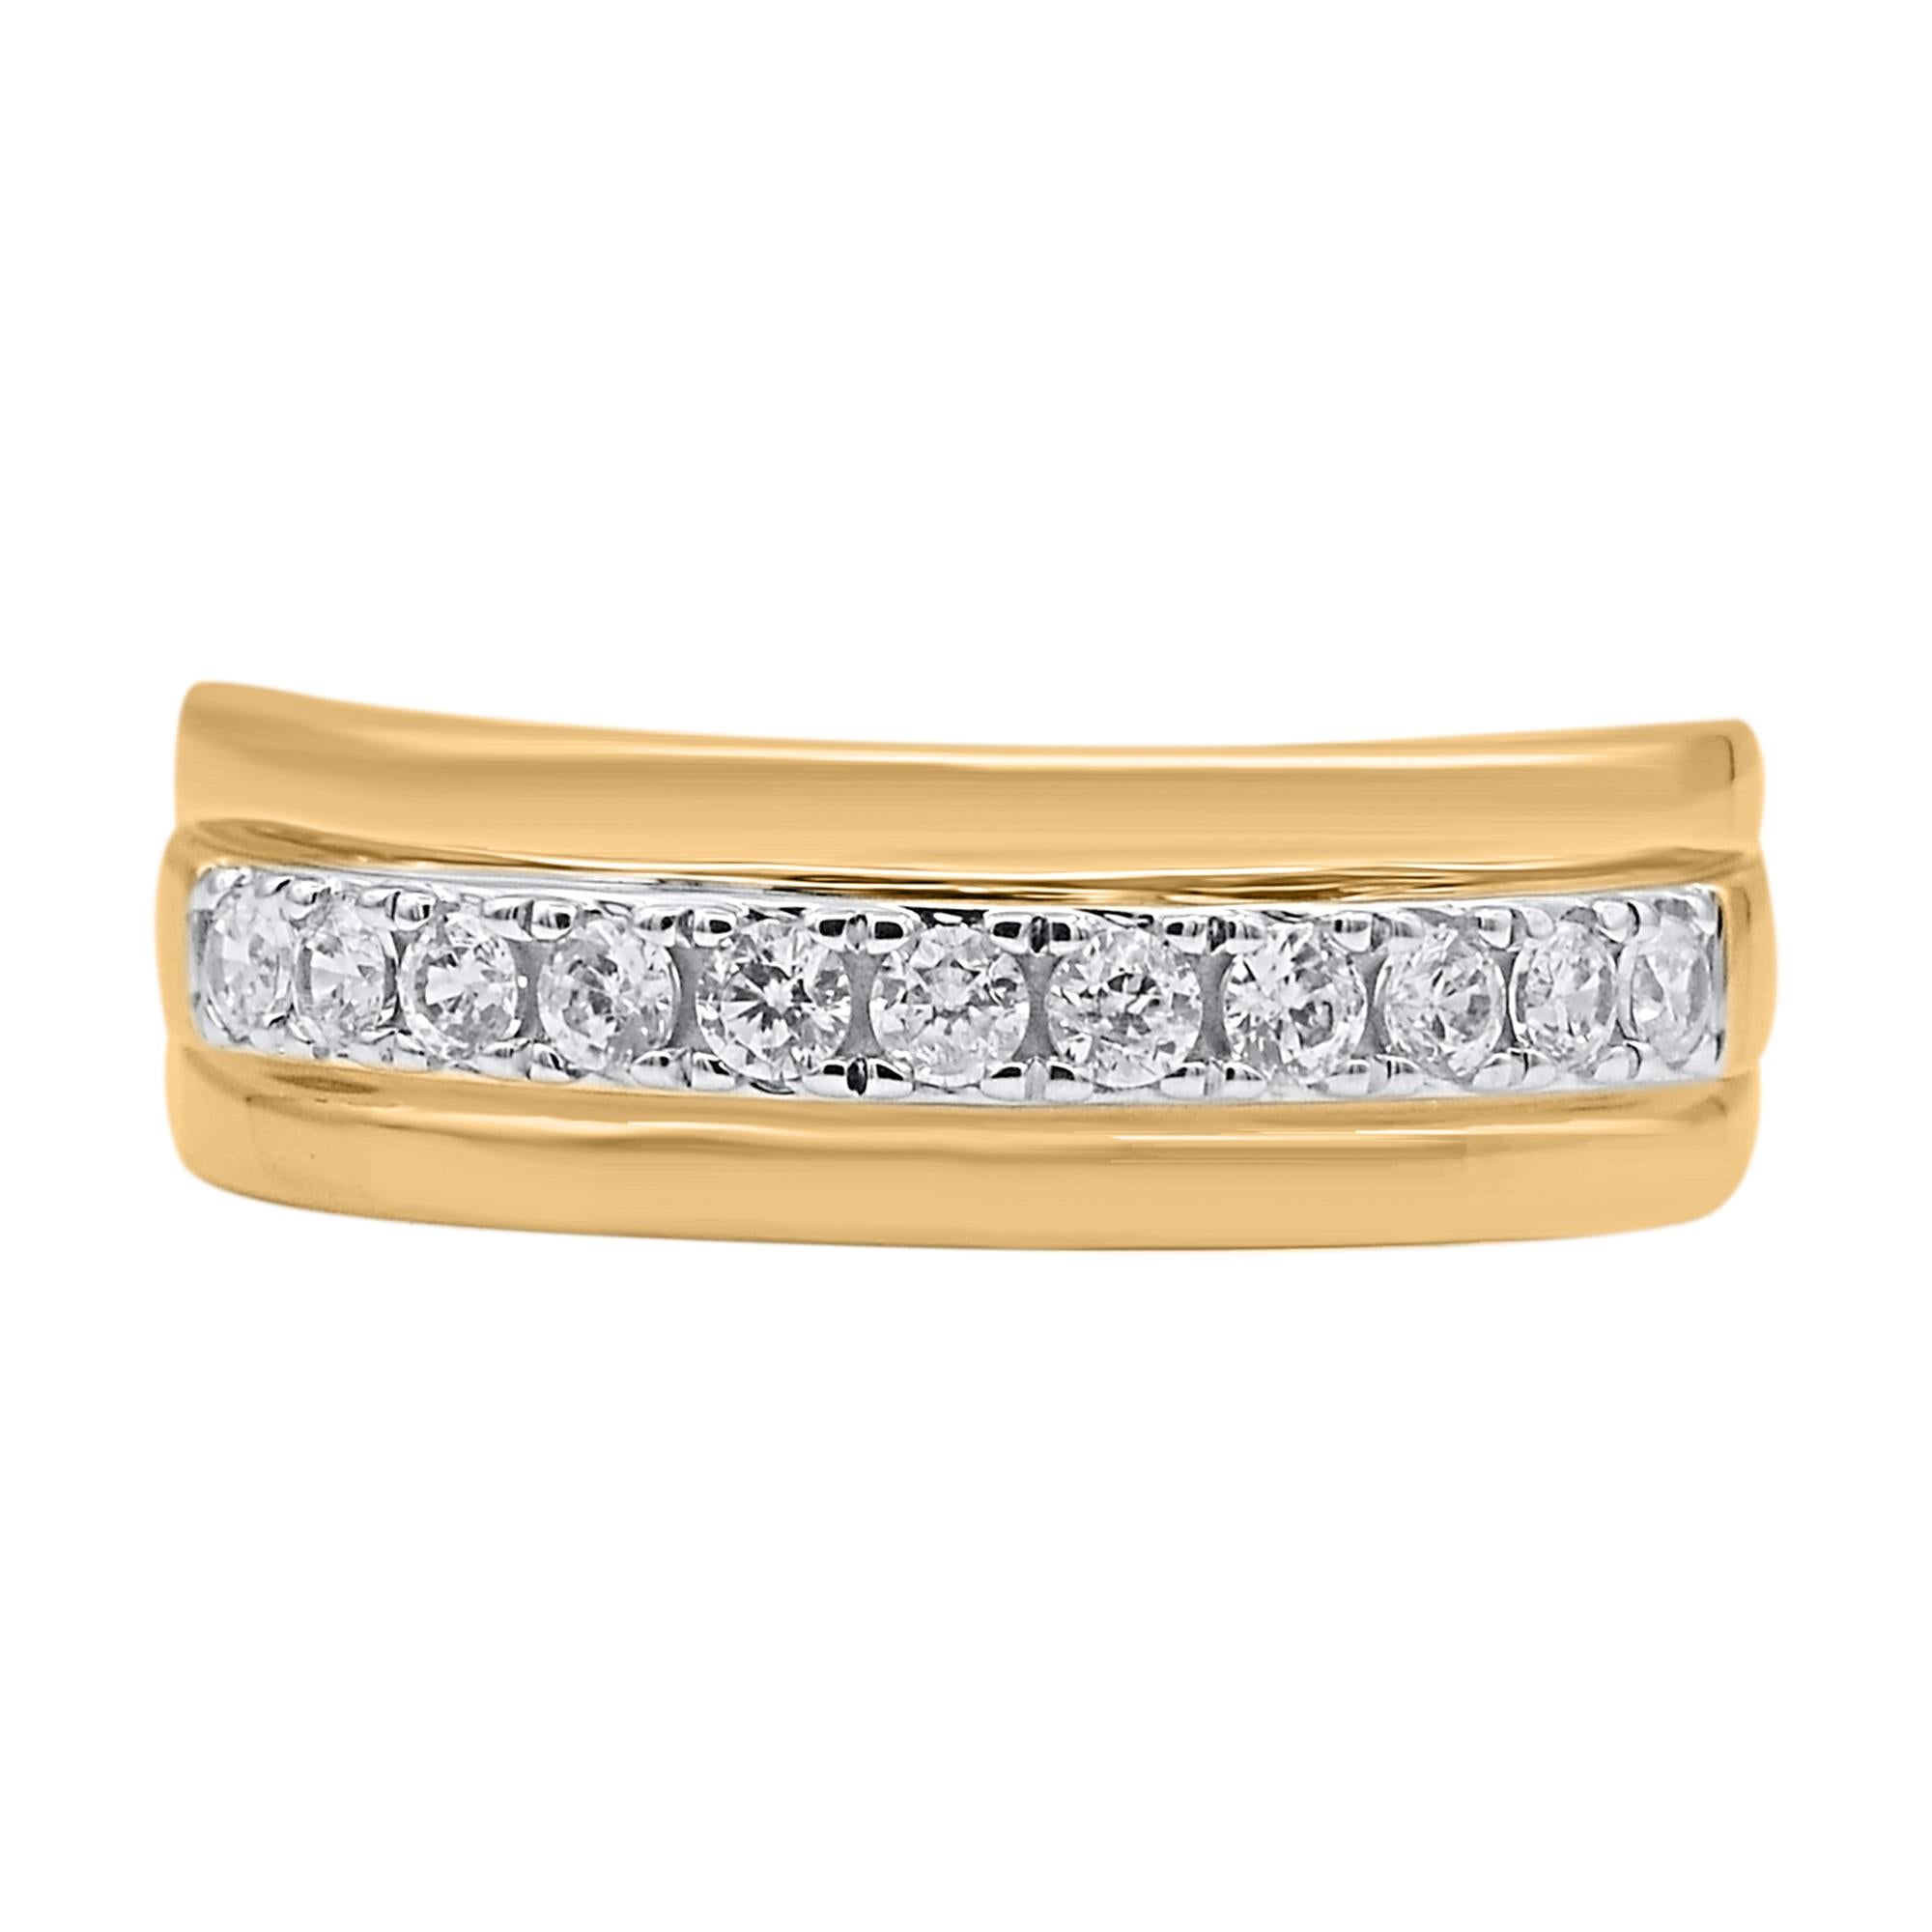 Contemporary TJD 0.50 Carat Brilliant Cut Natural Diamond 14KT Yellow Gold Men's Band Ring For Sale